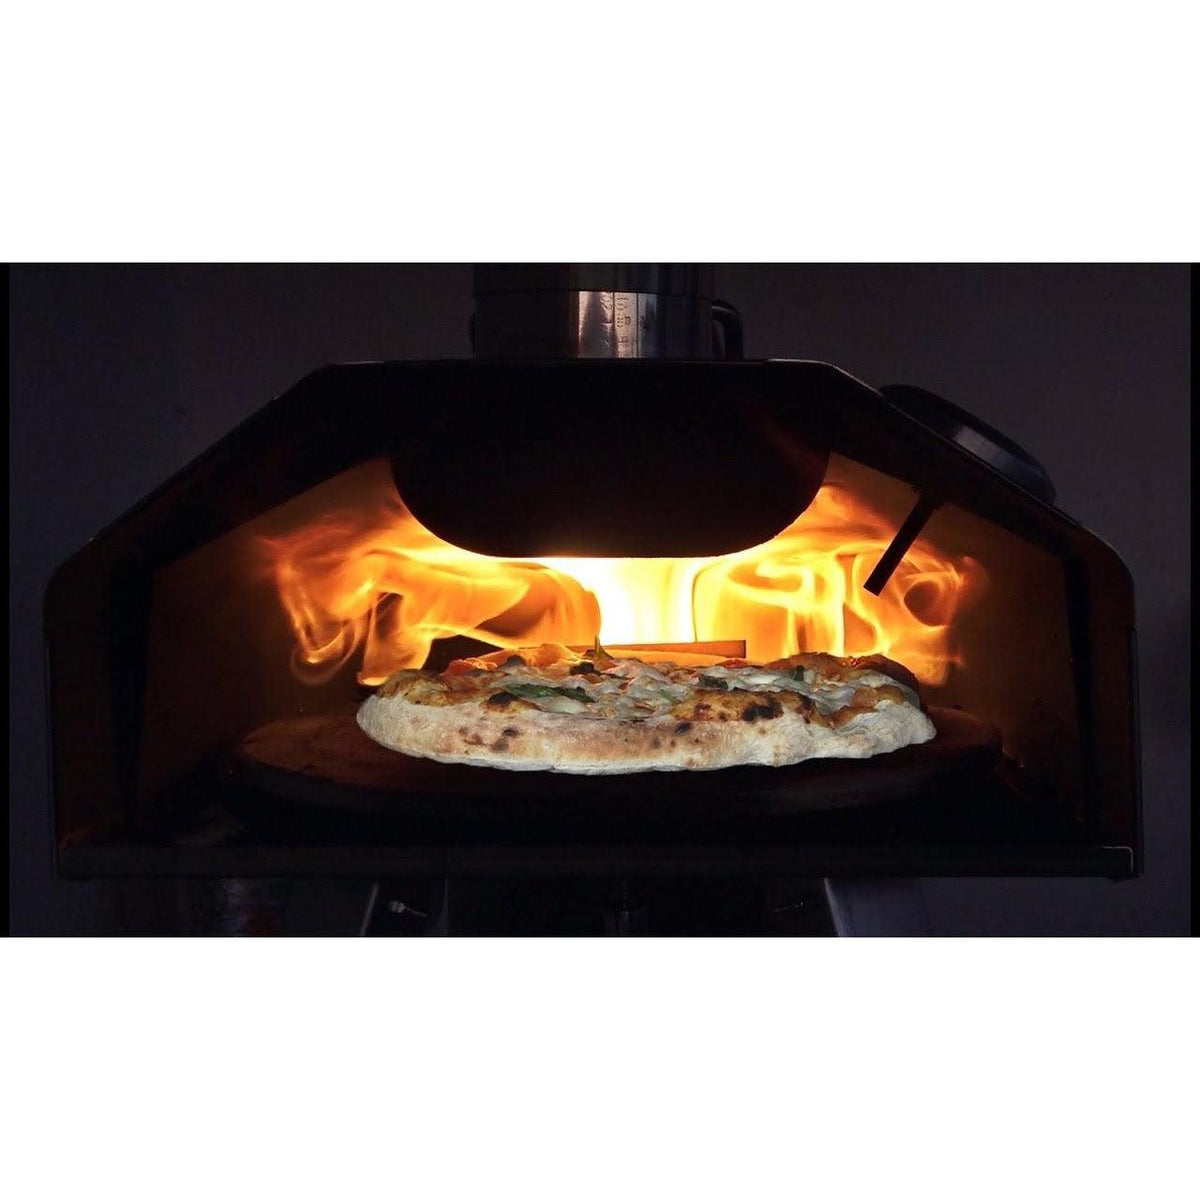 Qubestove Rotating Pizza Oven and Stove - Stainless Steel | 007159 from DID Electrical - guaranteed Irish, guaranteed quality service. (6977626439868)